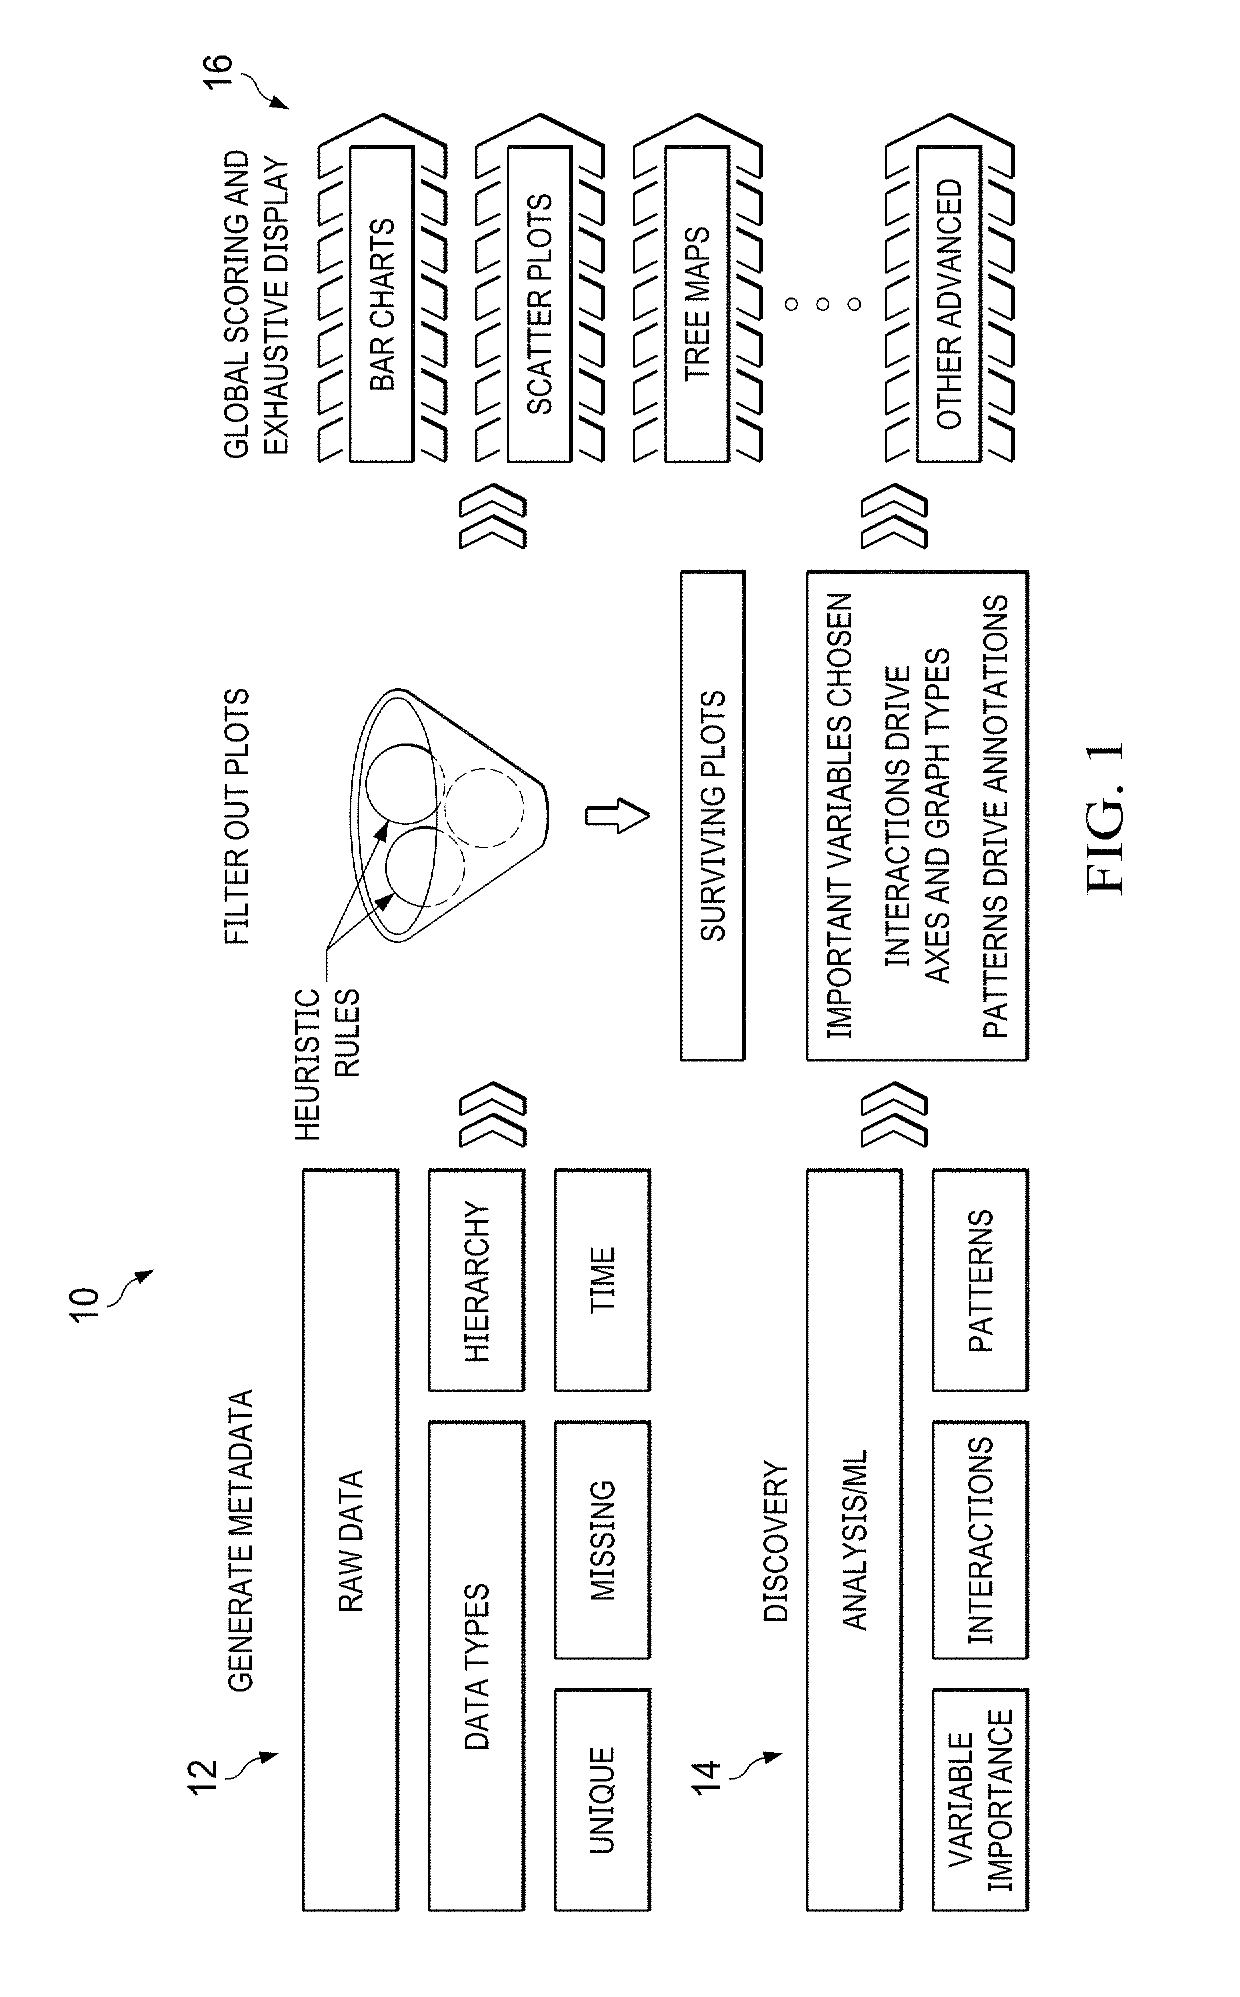 Predictive engine for multistage pattern discovery and visual analytics recommendations